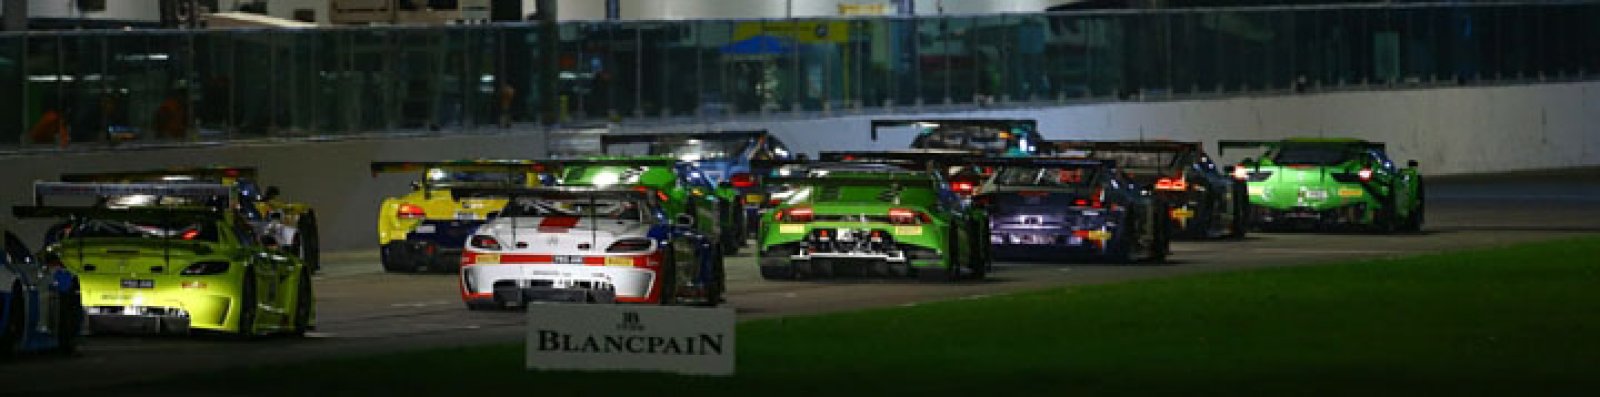 Immense 40-car entry list for Misano round of Blancpain GT Series Sprint Cup